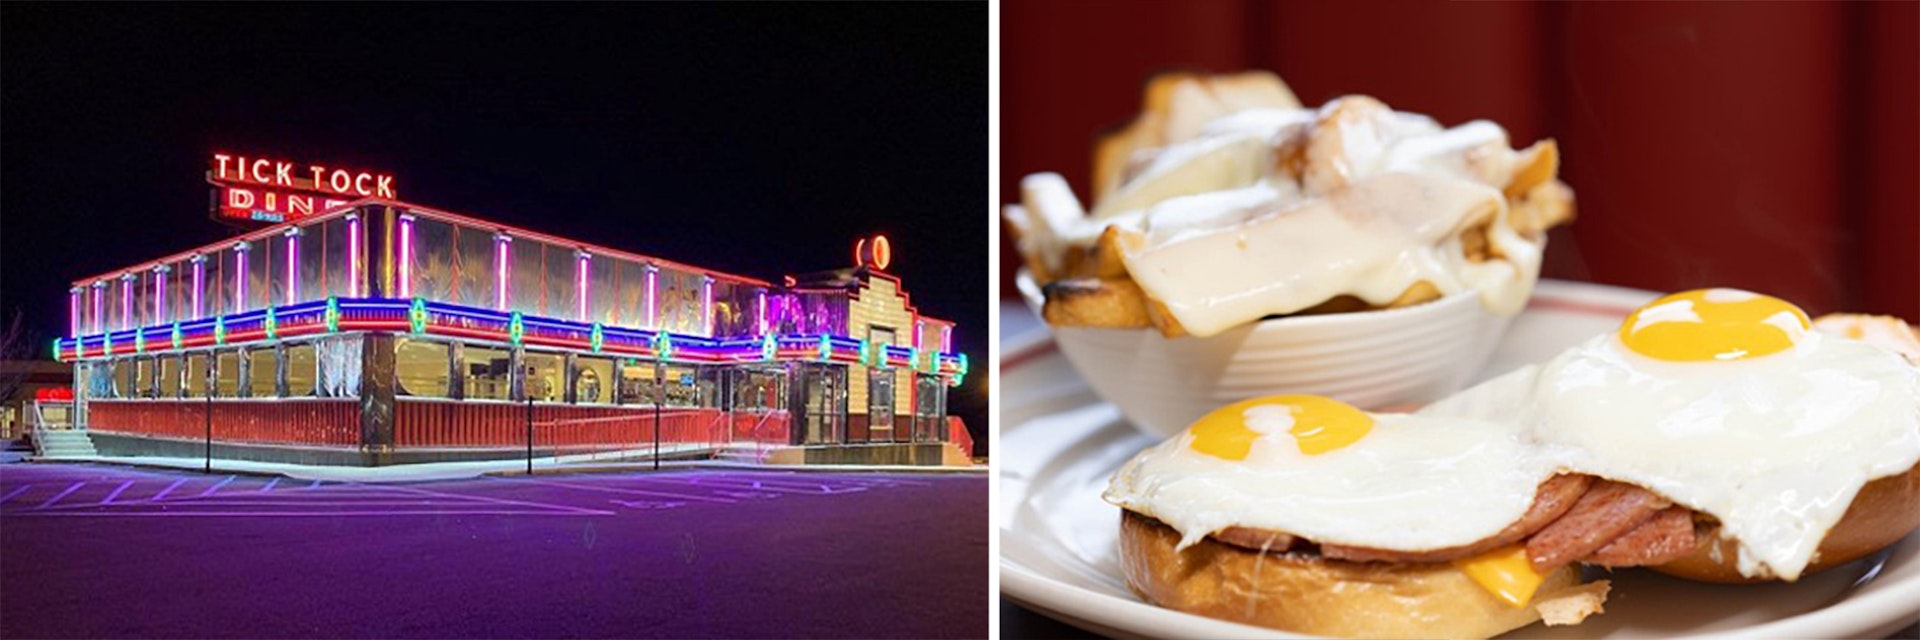 Left: The neon-lit exterior of a roadside diner. Right: A breakfast entree